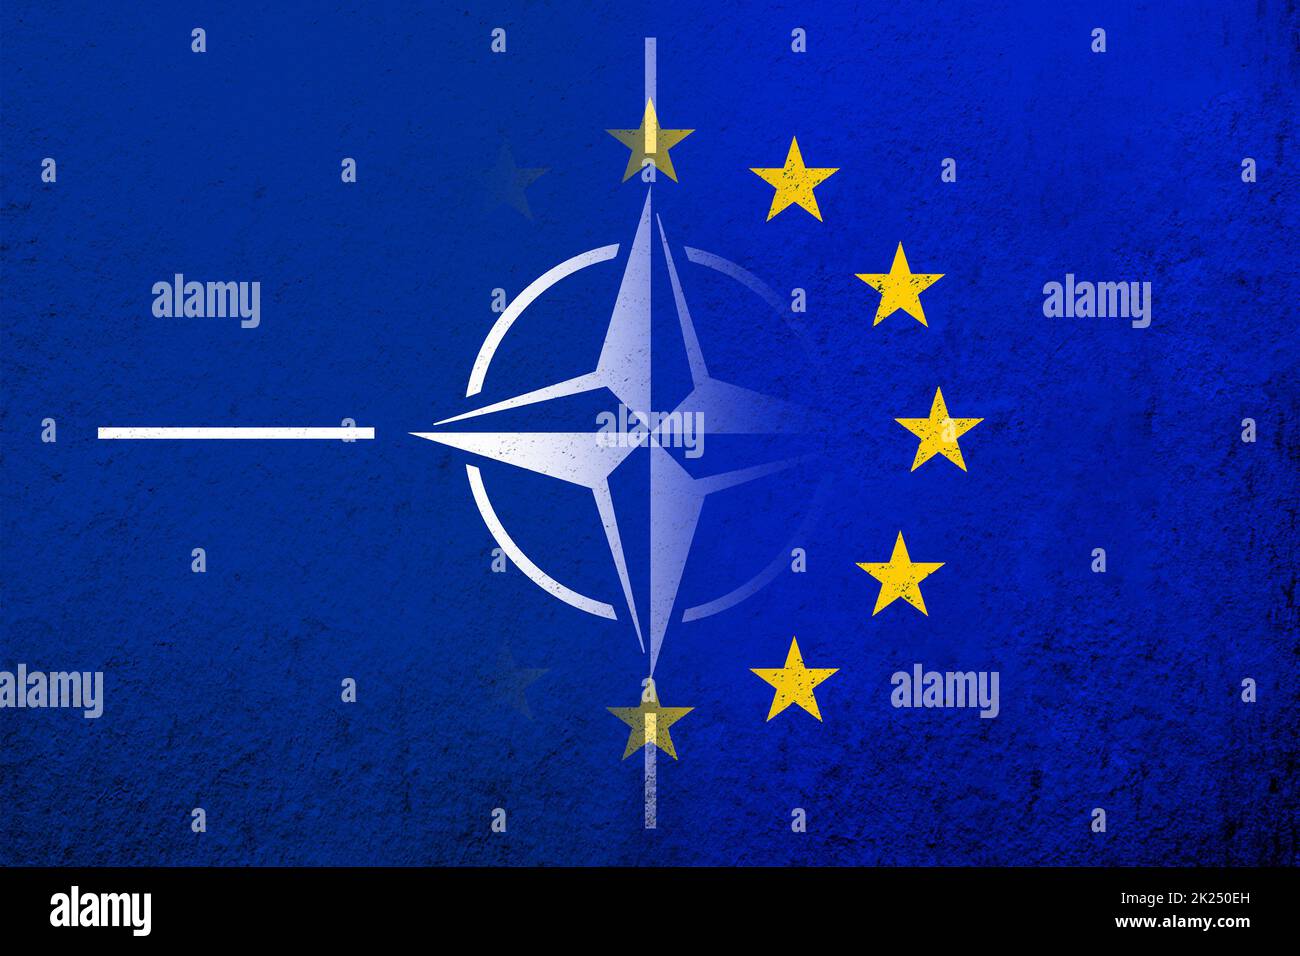 Flag of the European Union with Flag of North Atlantic Alliance NATO. Grunge background Stock Photo